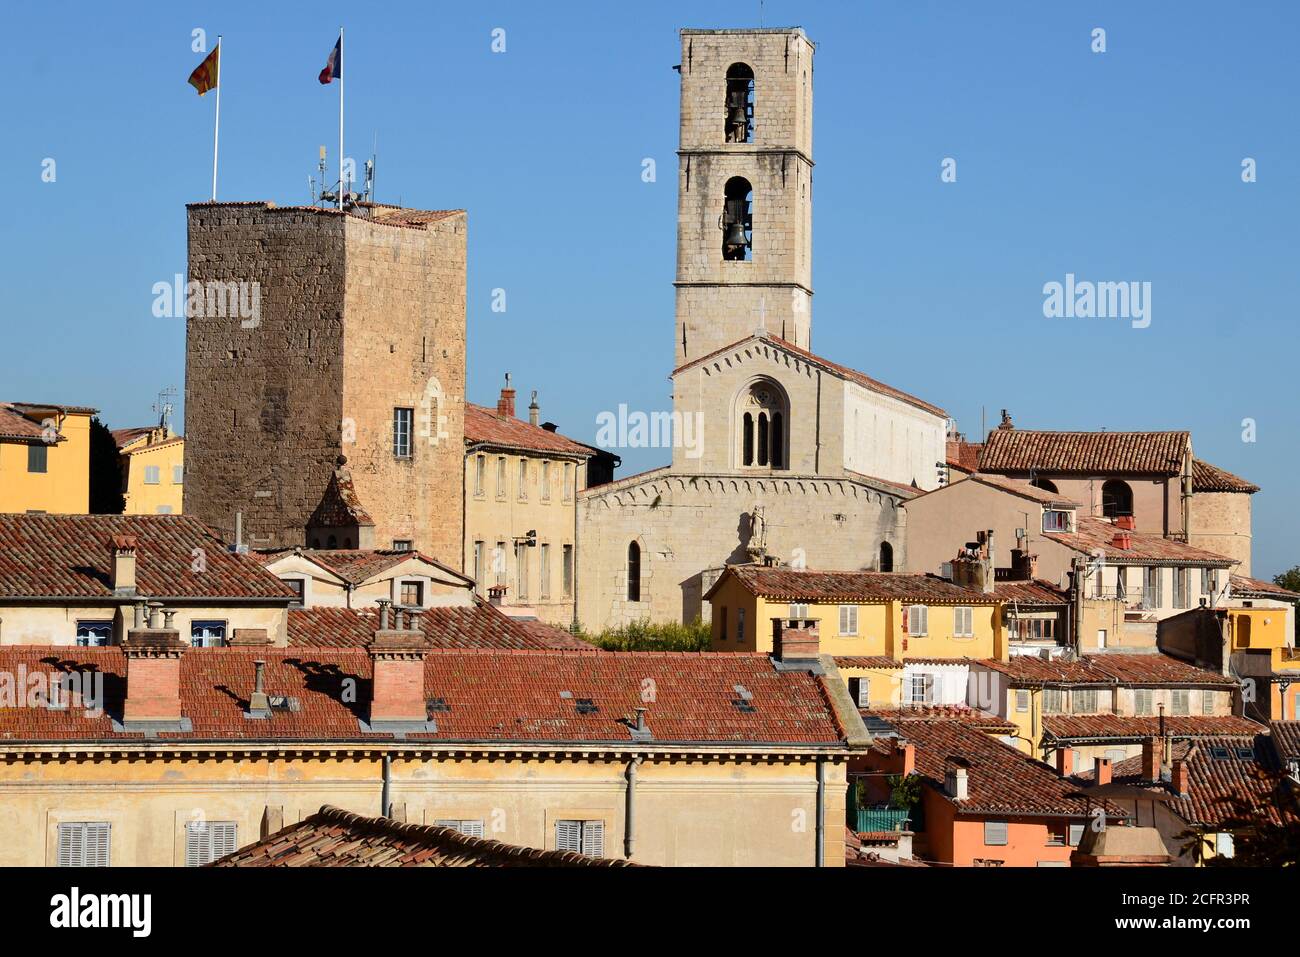 France, french riviera, Grasse, this town is the world perfume capital with its famous perfume factories and its floral cultures, jasmine, rose. Stock Photo